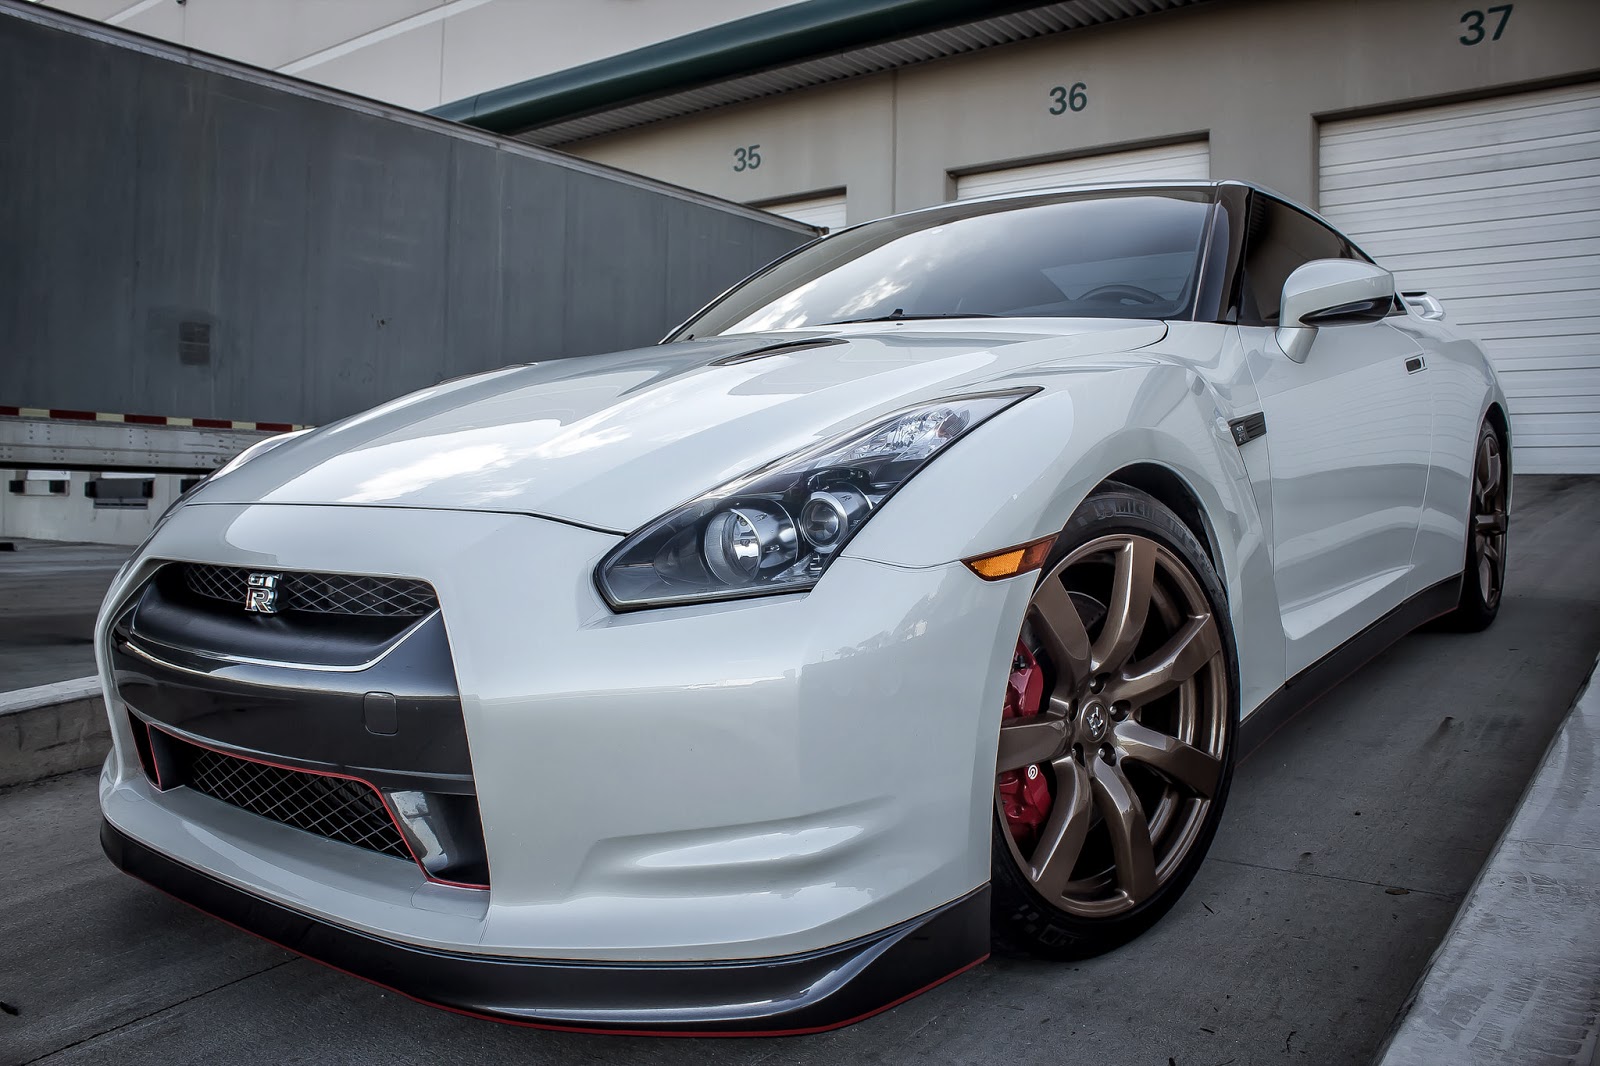 Customized Nissan GTR 2010 White on Gold Rims w/ Red Calipers and Trim